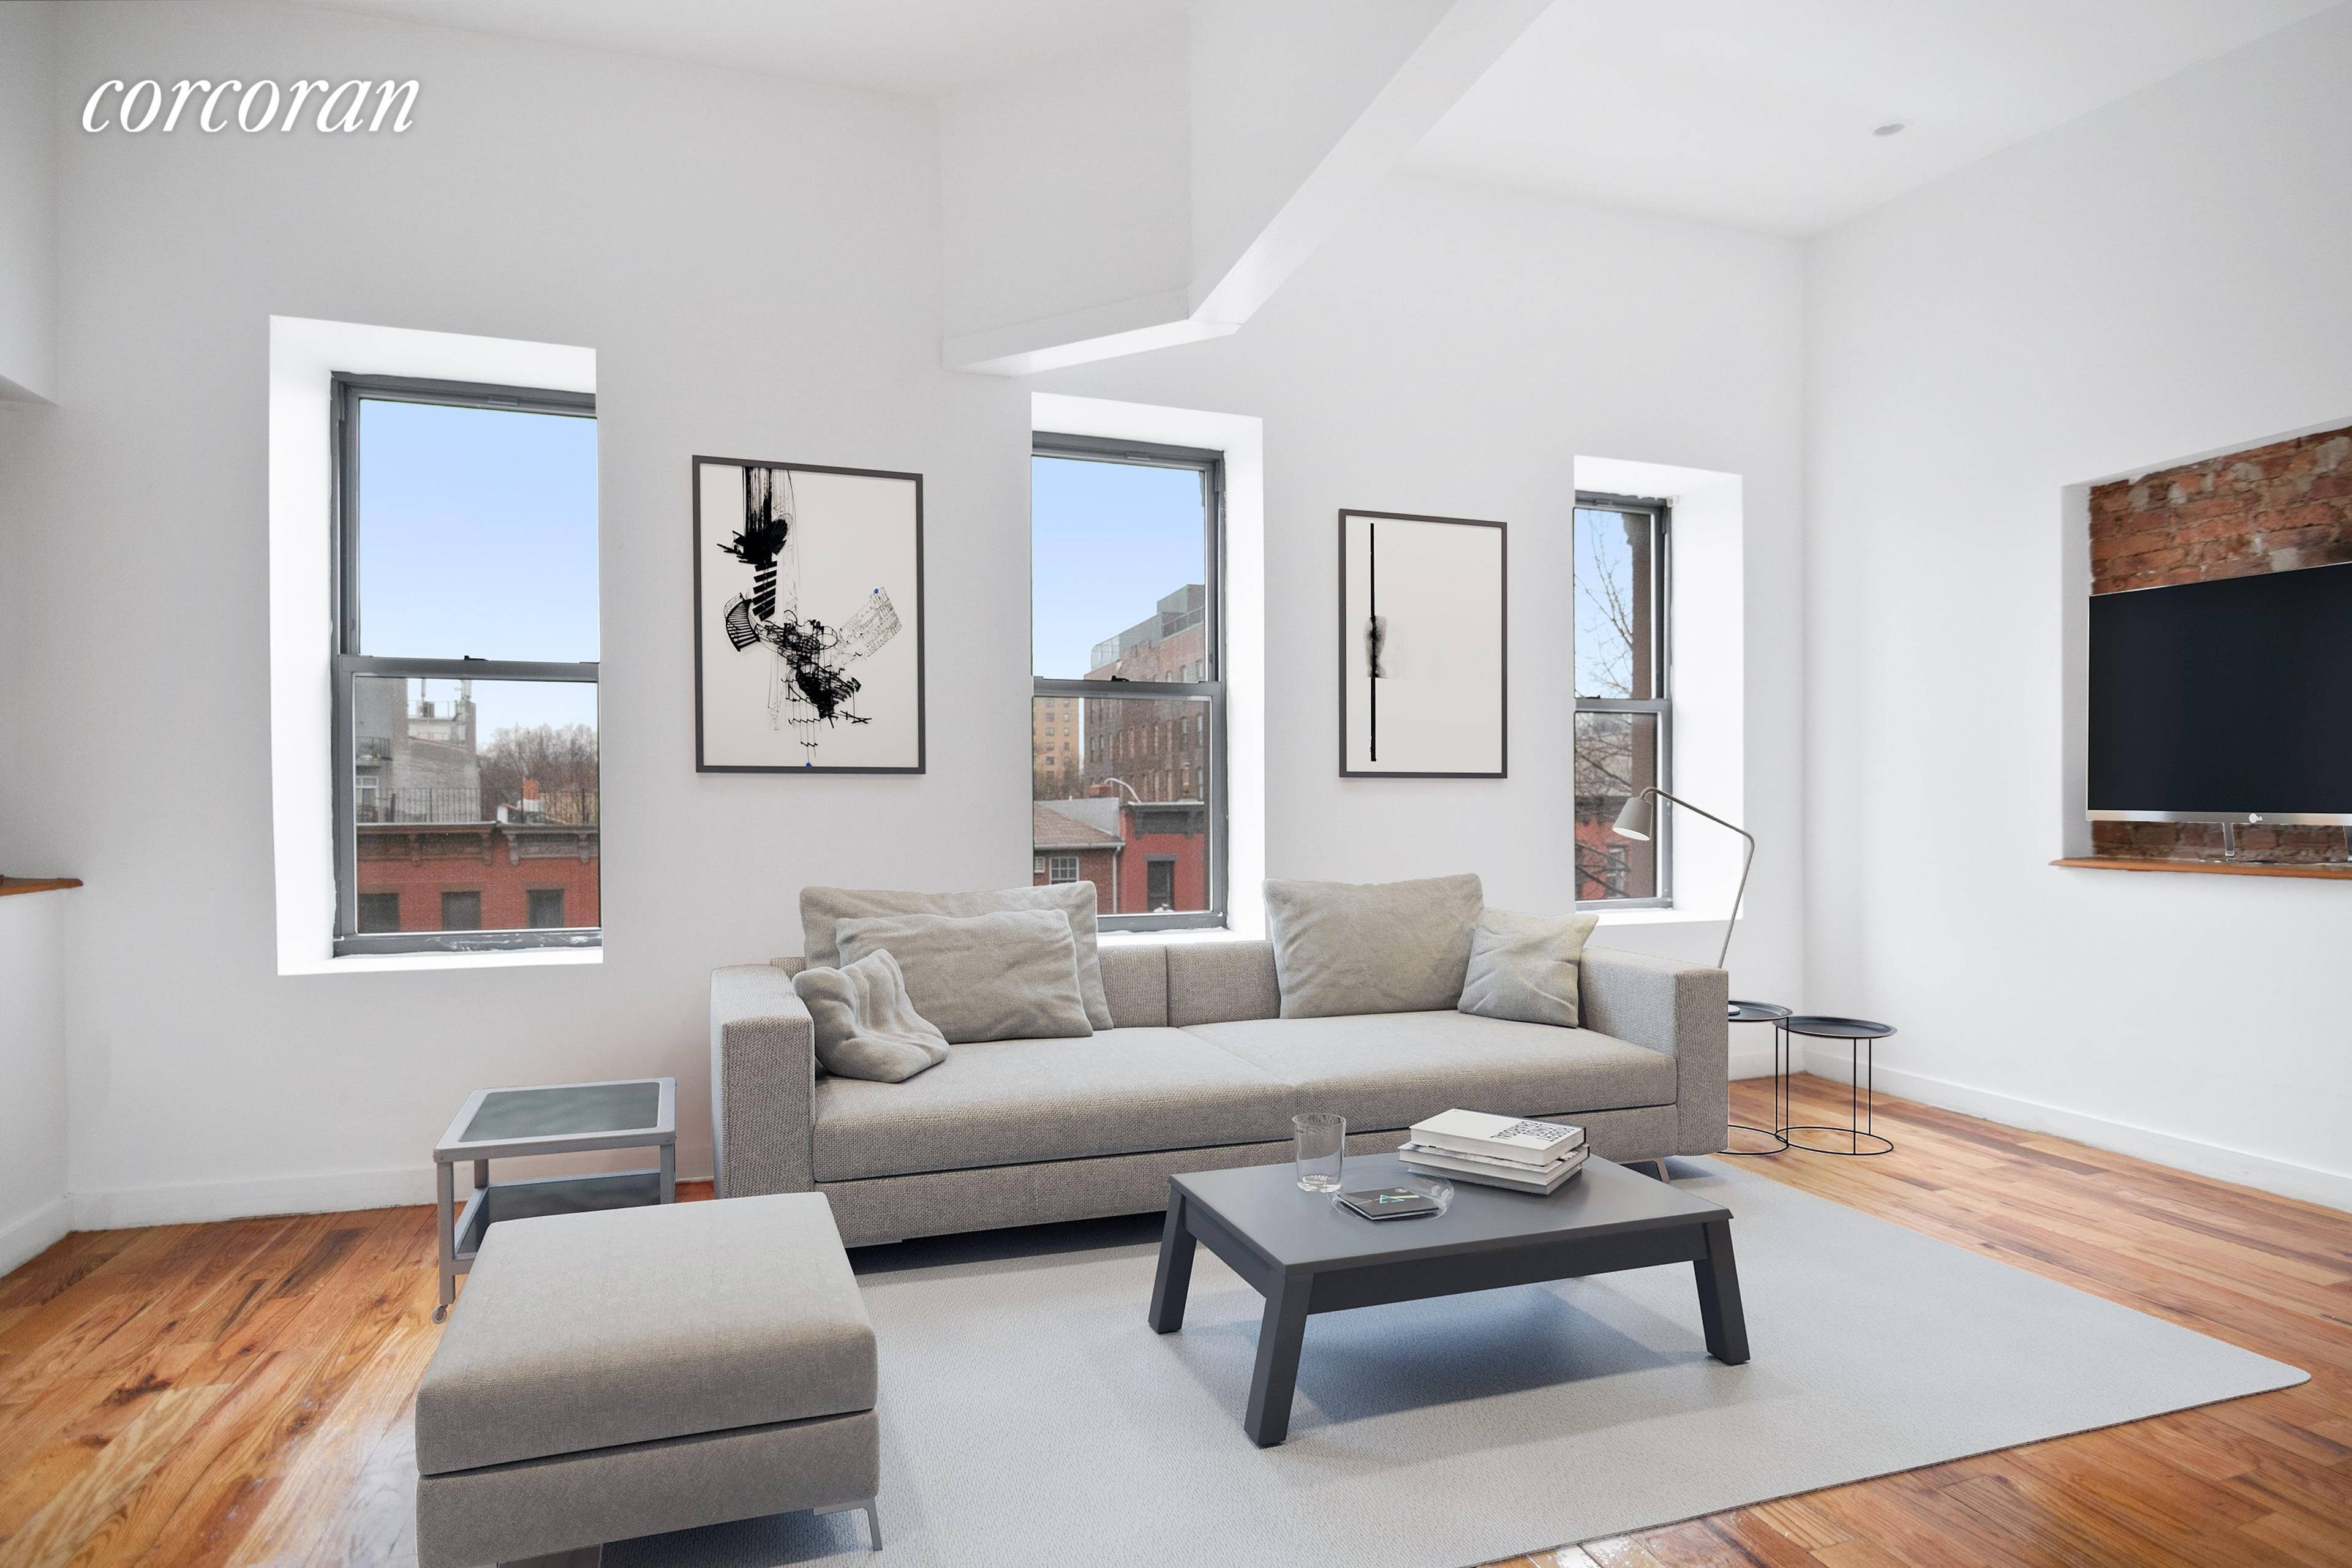 Let the light shine in ! This top floor, renovated two bedroom apartment features a modern kitchen that looks out to a spacious living area.